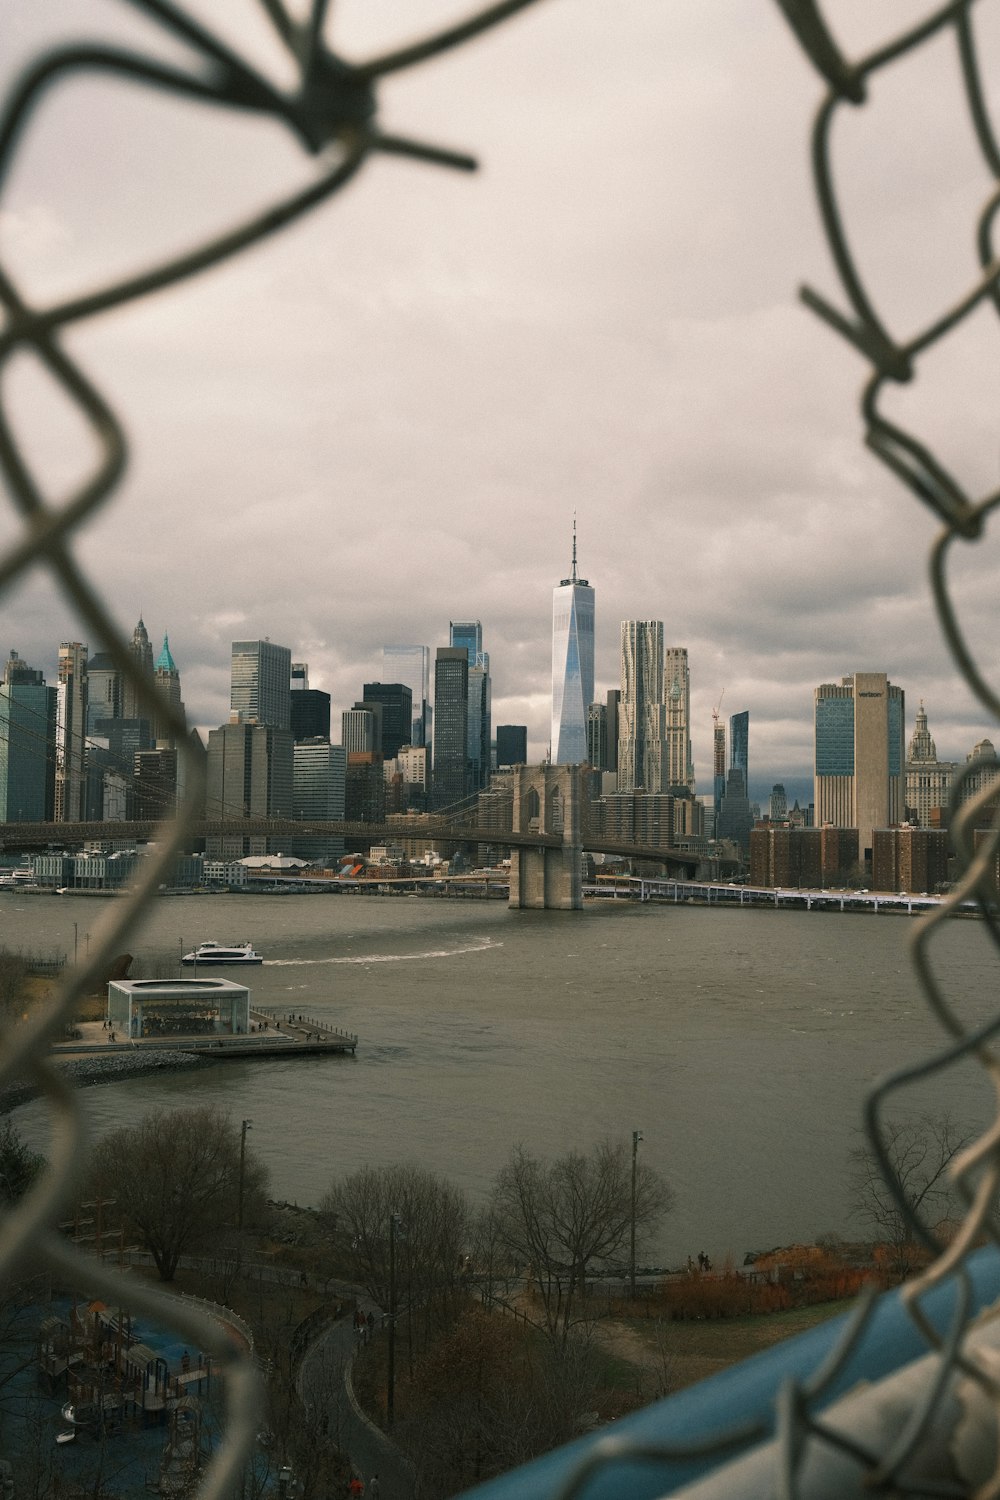 a view of a city skyline through a chain link fence